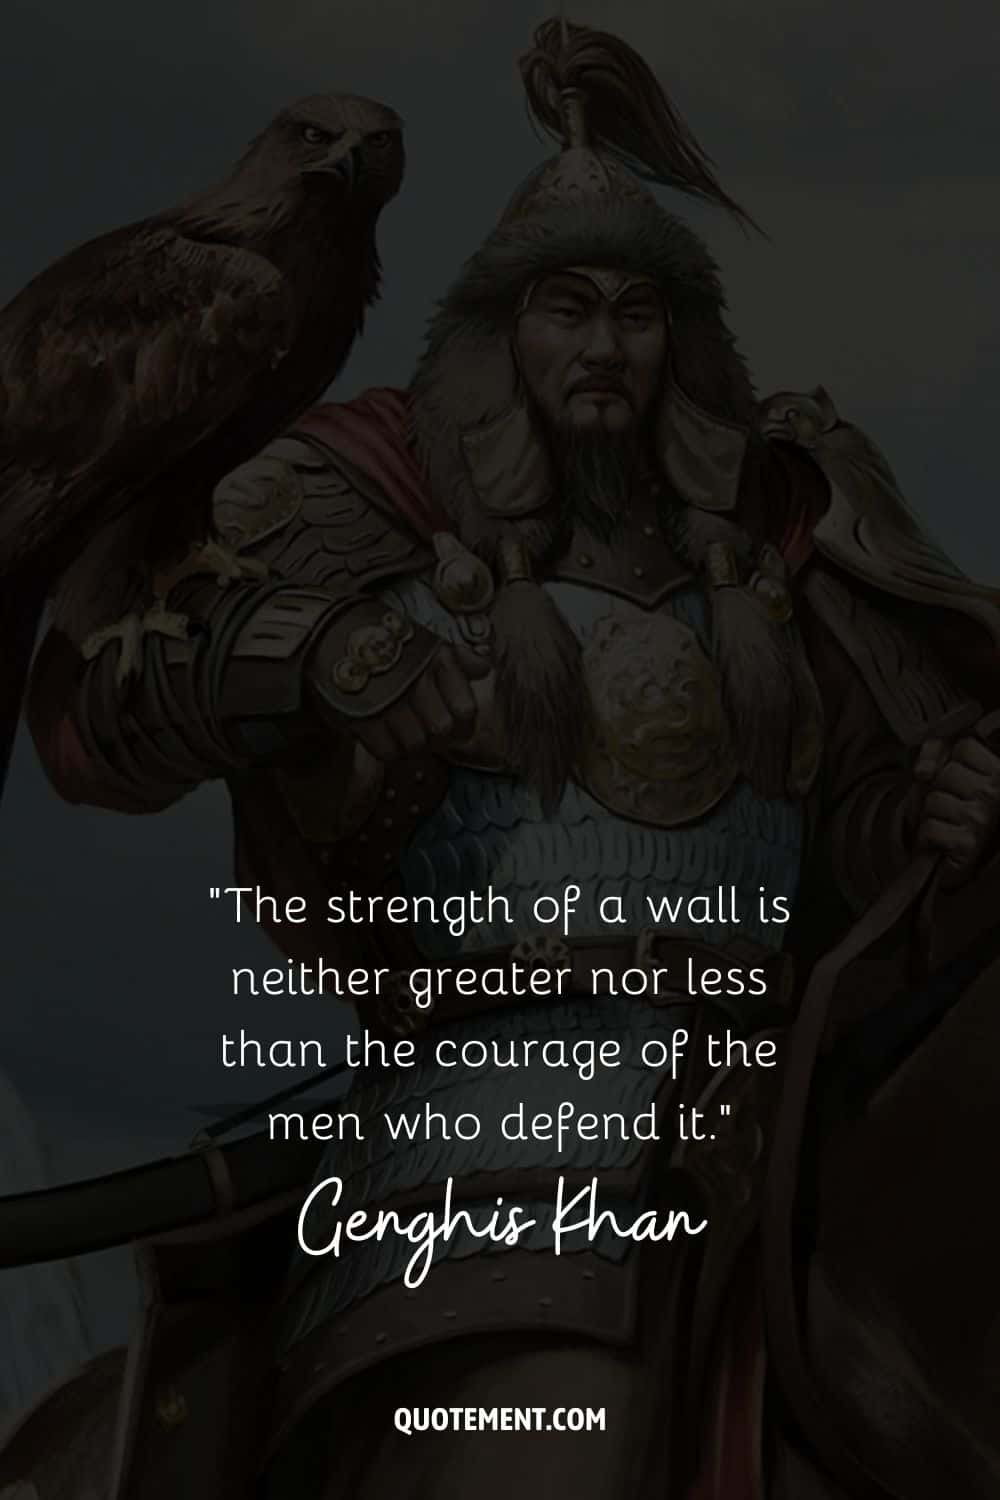 The strength of a wall is neither greater nor less than the courage of the men who defend it